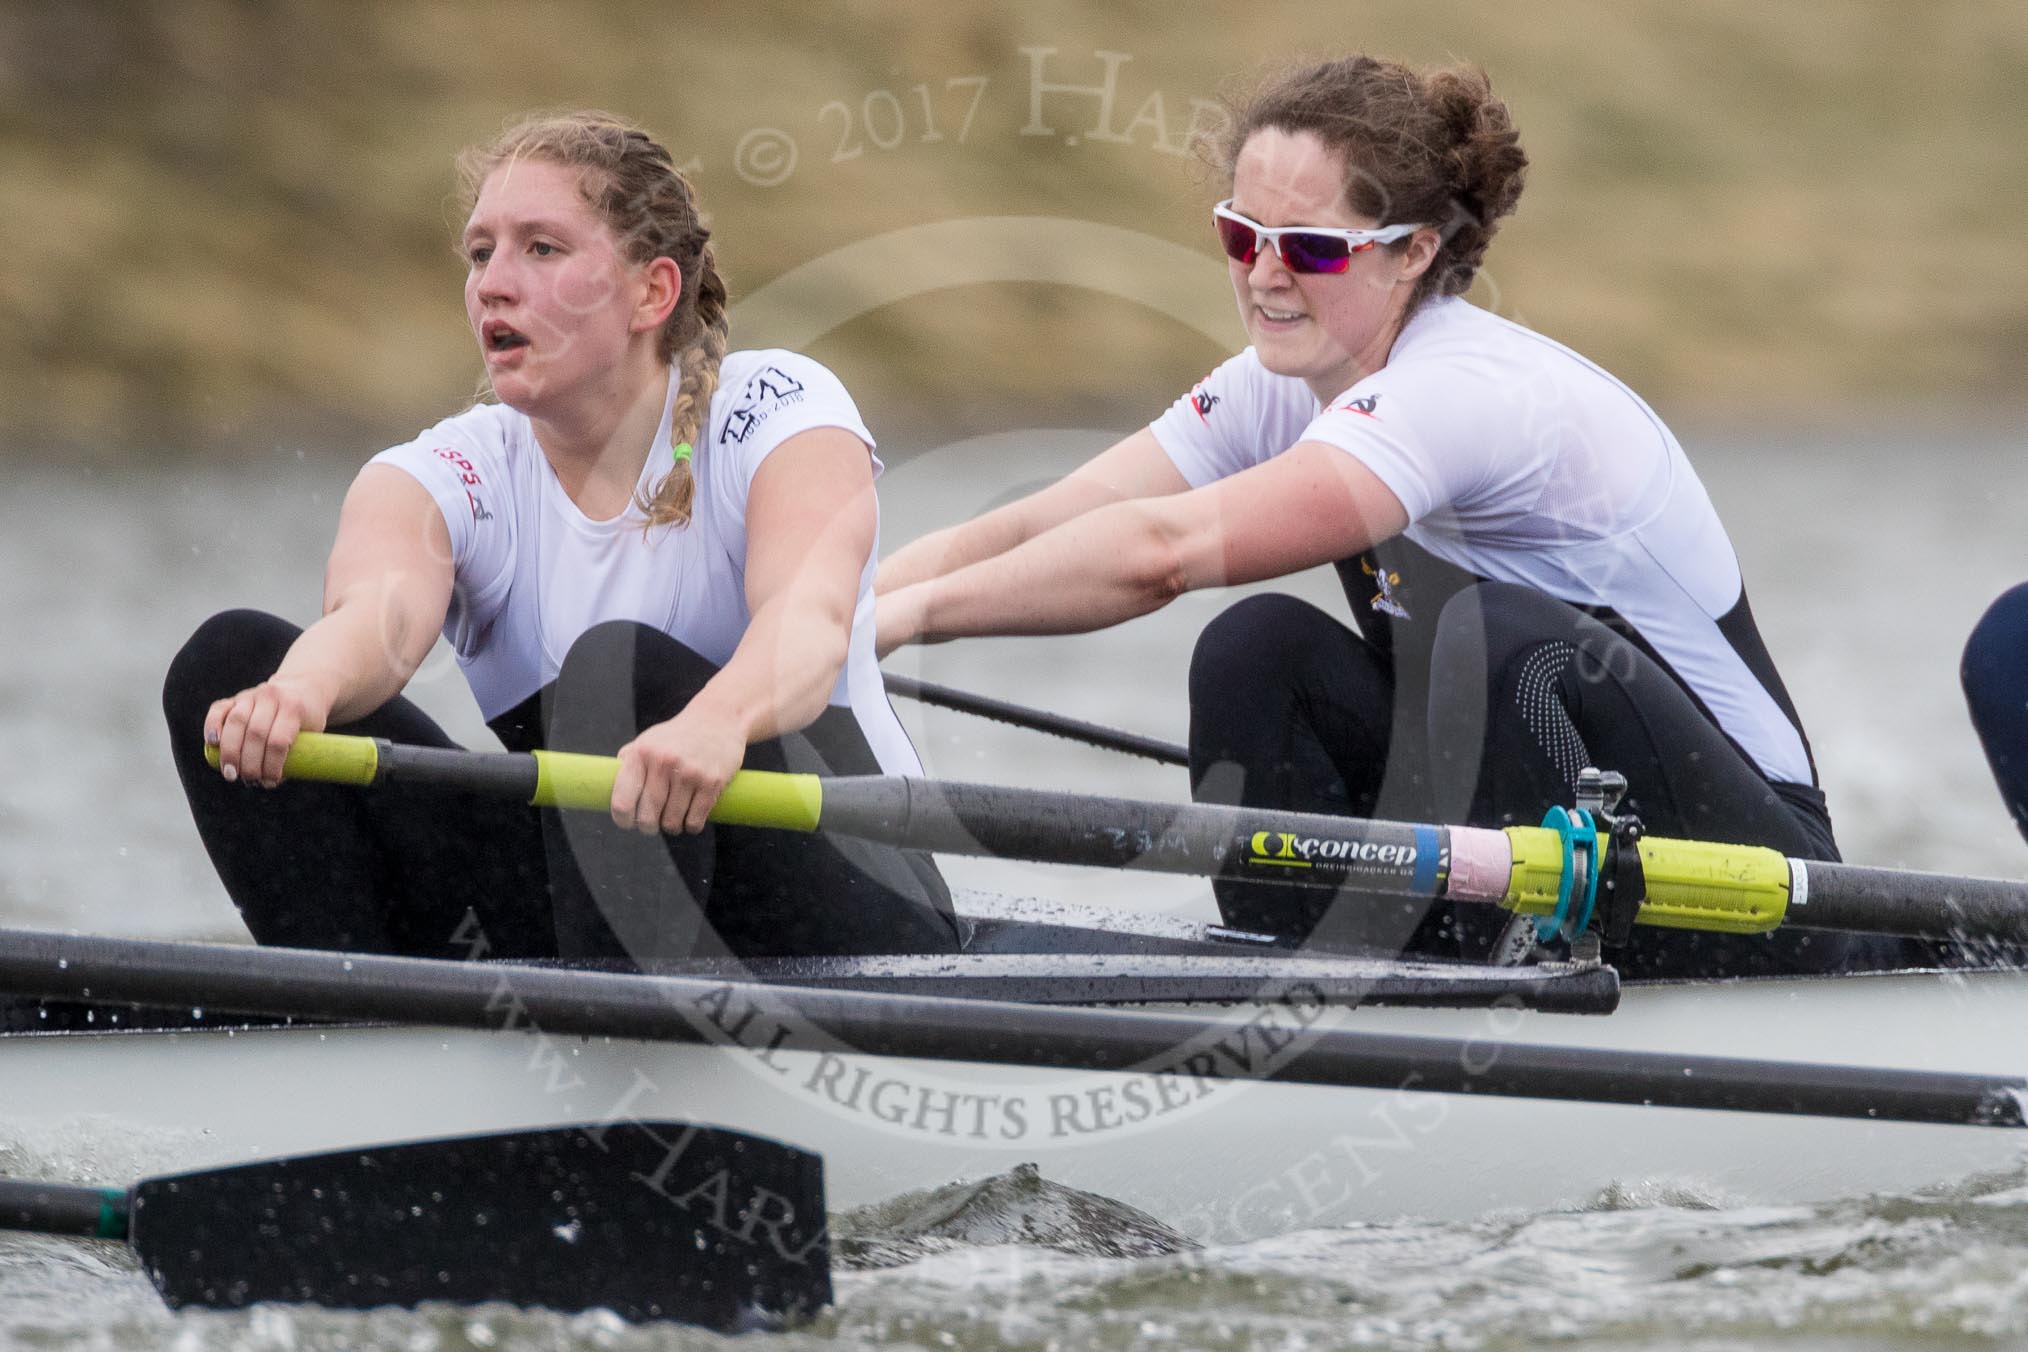 The Cancer Research UK Boat Race season 2017 - Women's Boat Race Fixture OUWBC vs Molesey BC: The Molesey boat, here 3 Lucy Primmer, 2 Caitlin Boyland.
River Thames between Putney Bridge and Mortlake,
London SW15,

United Kingdom,
on 19 March 2017 at 16:11, image #117